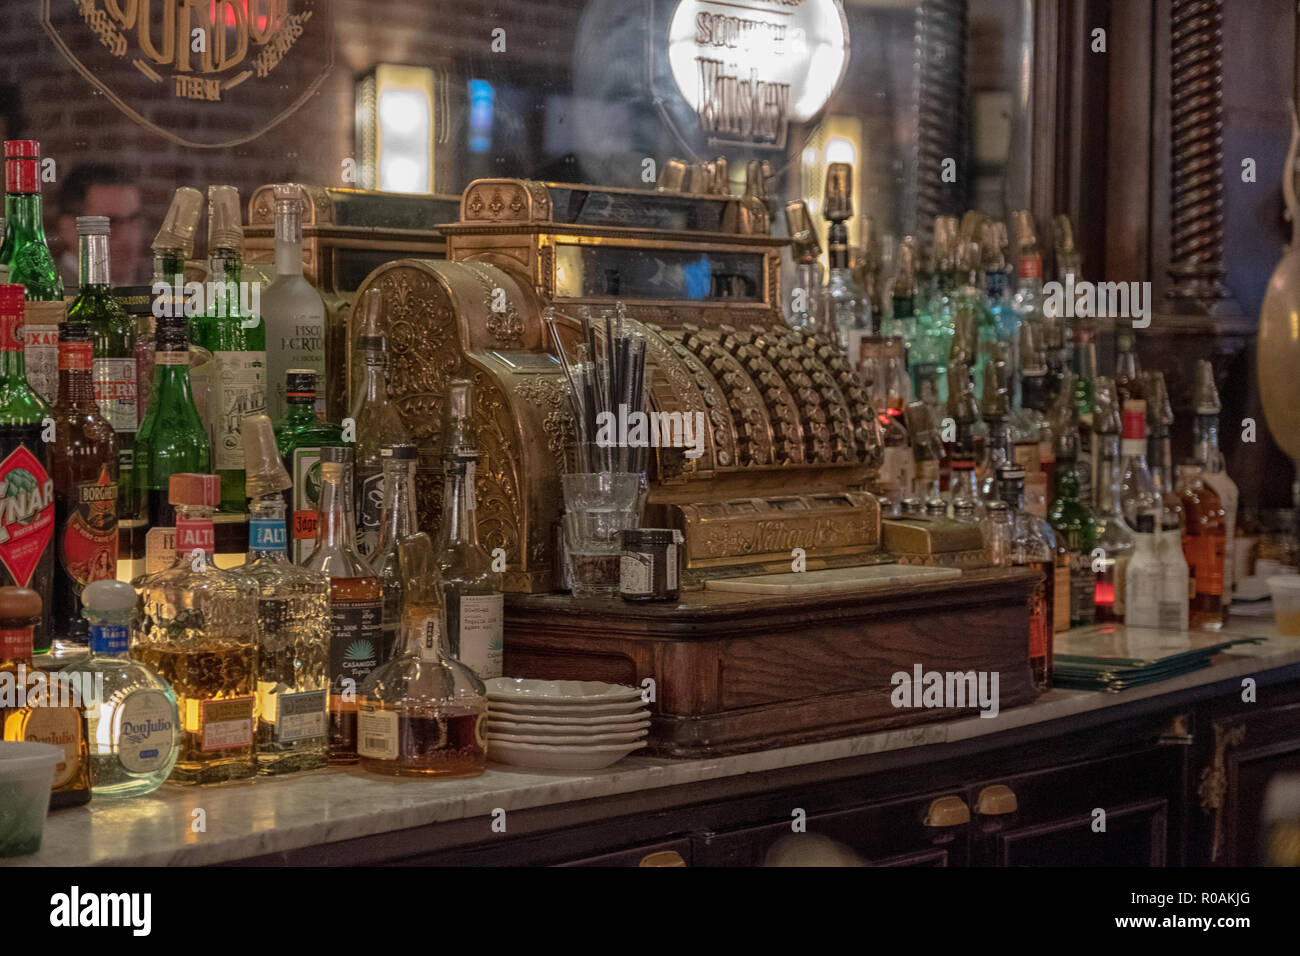 Vintage National Cash Register in a bar in New York City Stock Photo